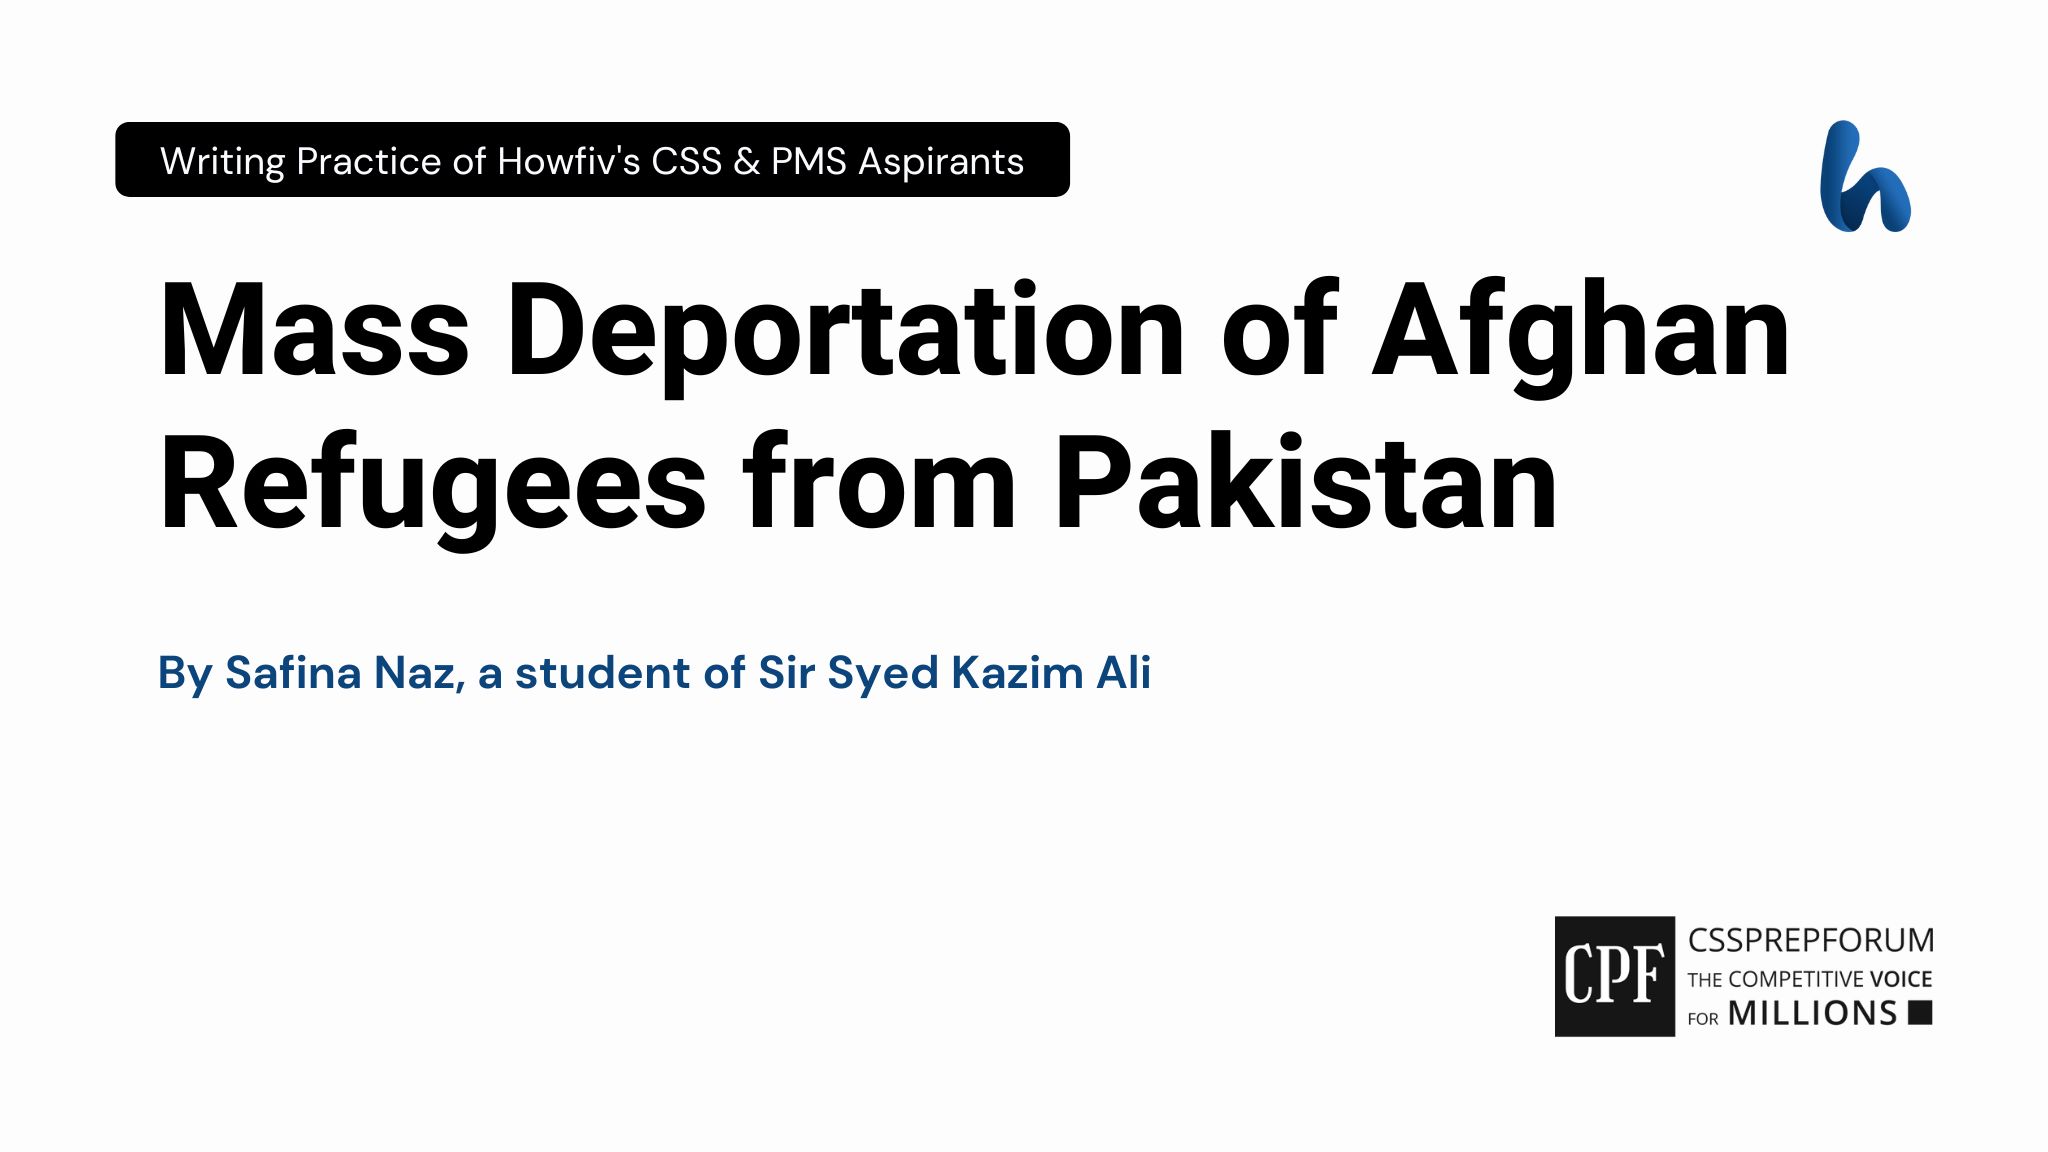 Mass Deportation of Afghan Refugees from Pakistan